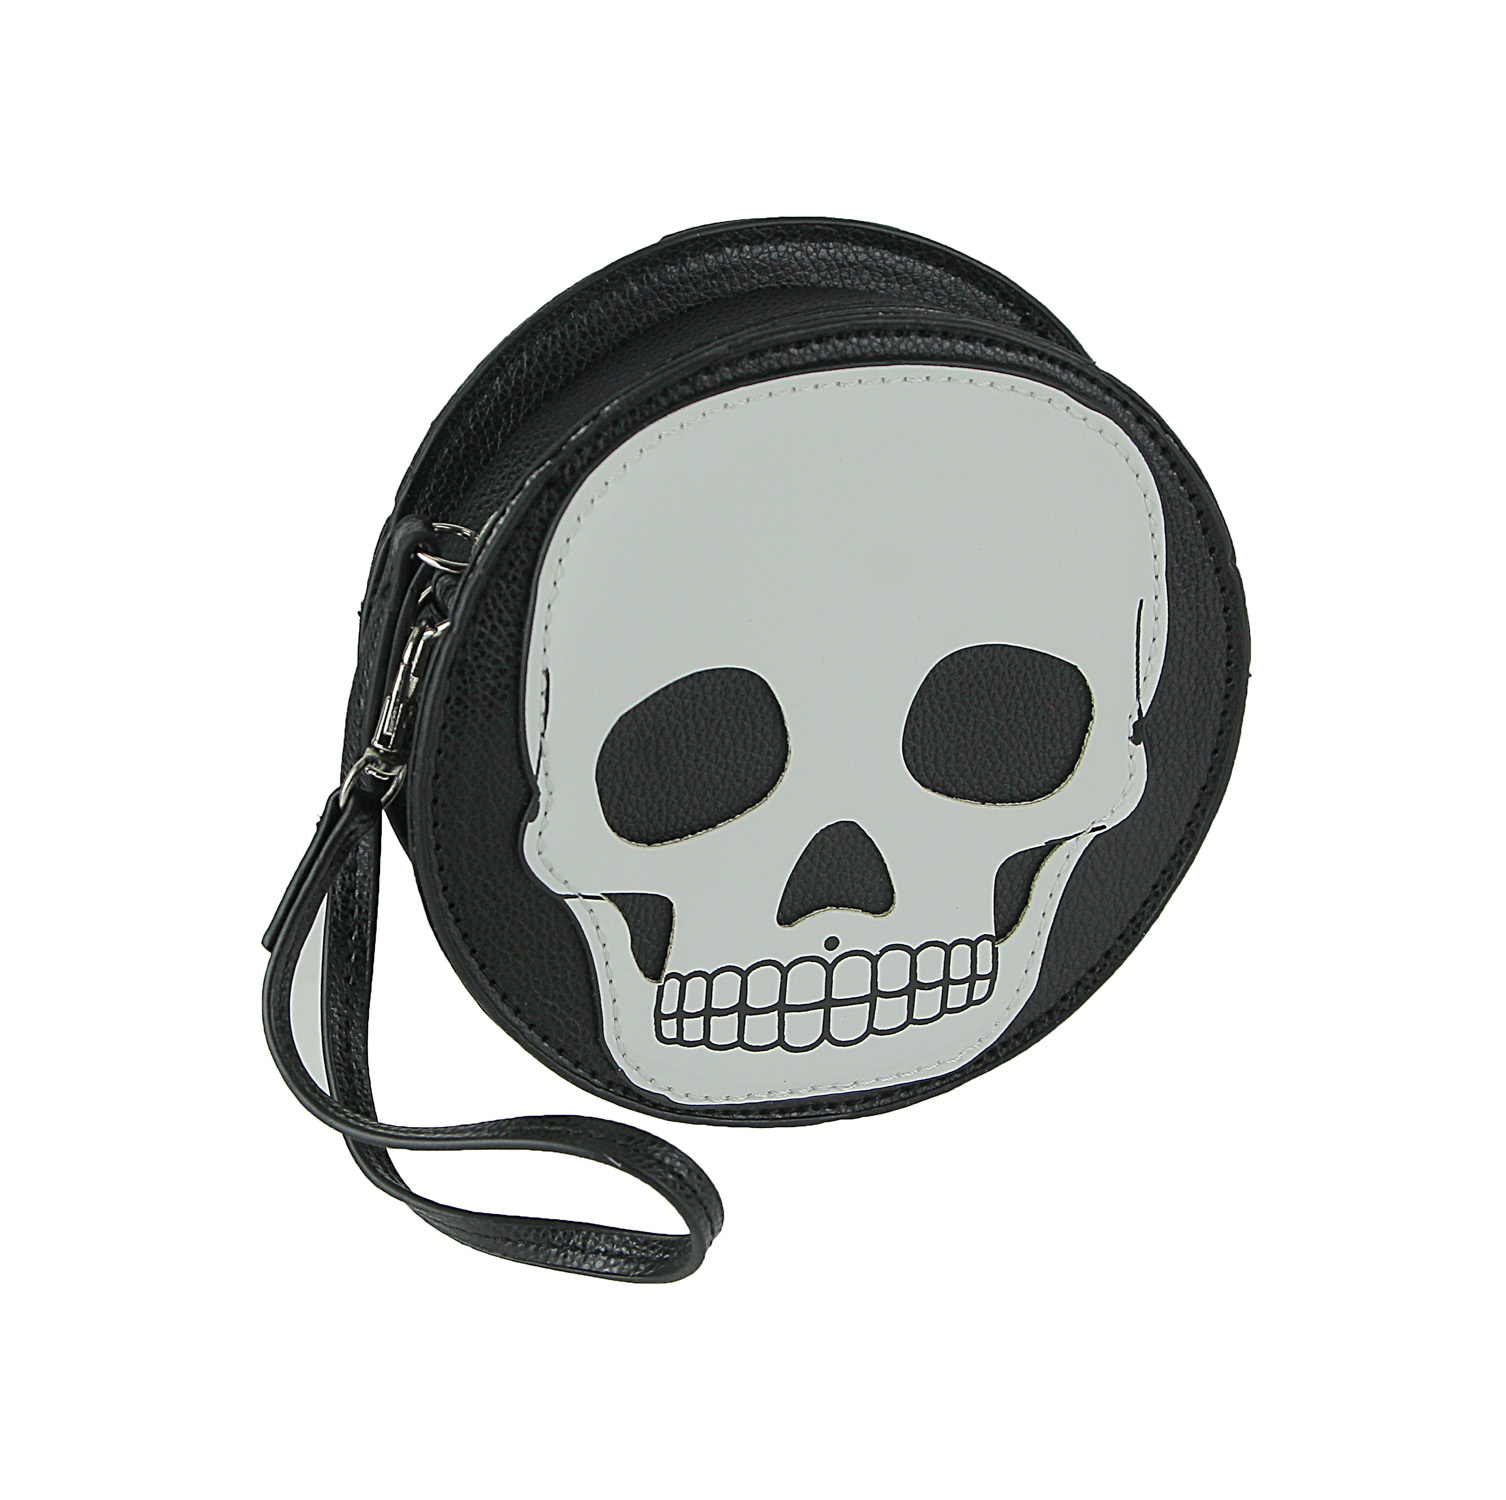 Primary image for Textured Black Vinyl Skull Design Round Wristlet Purse with Removable Strap